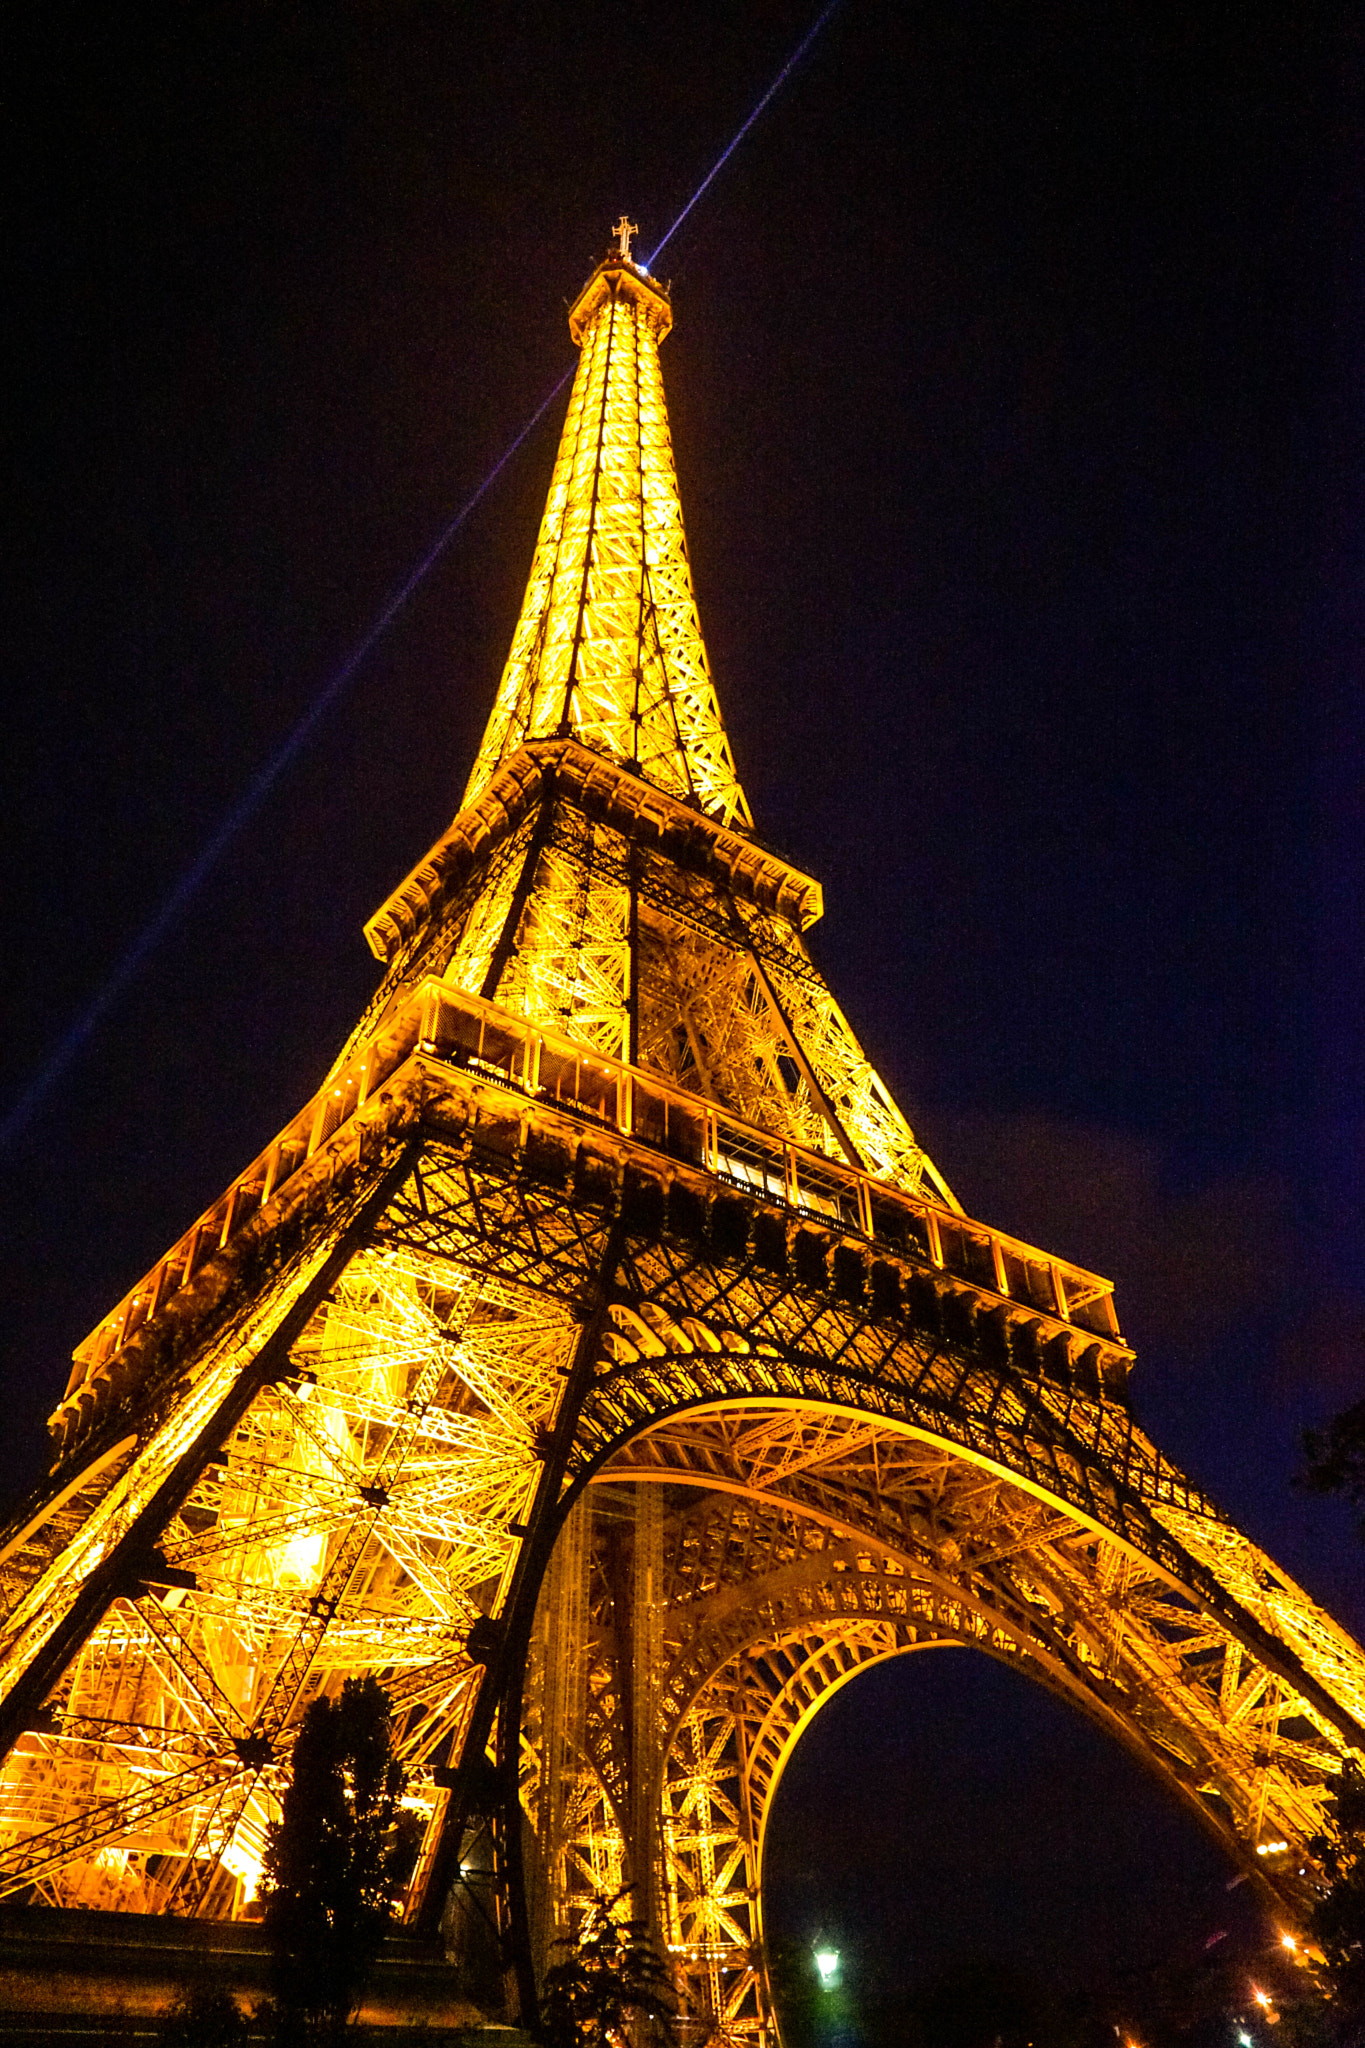 Sony a7 sample photo. Eiffel tower at night photography